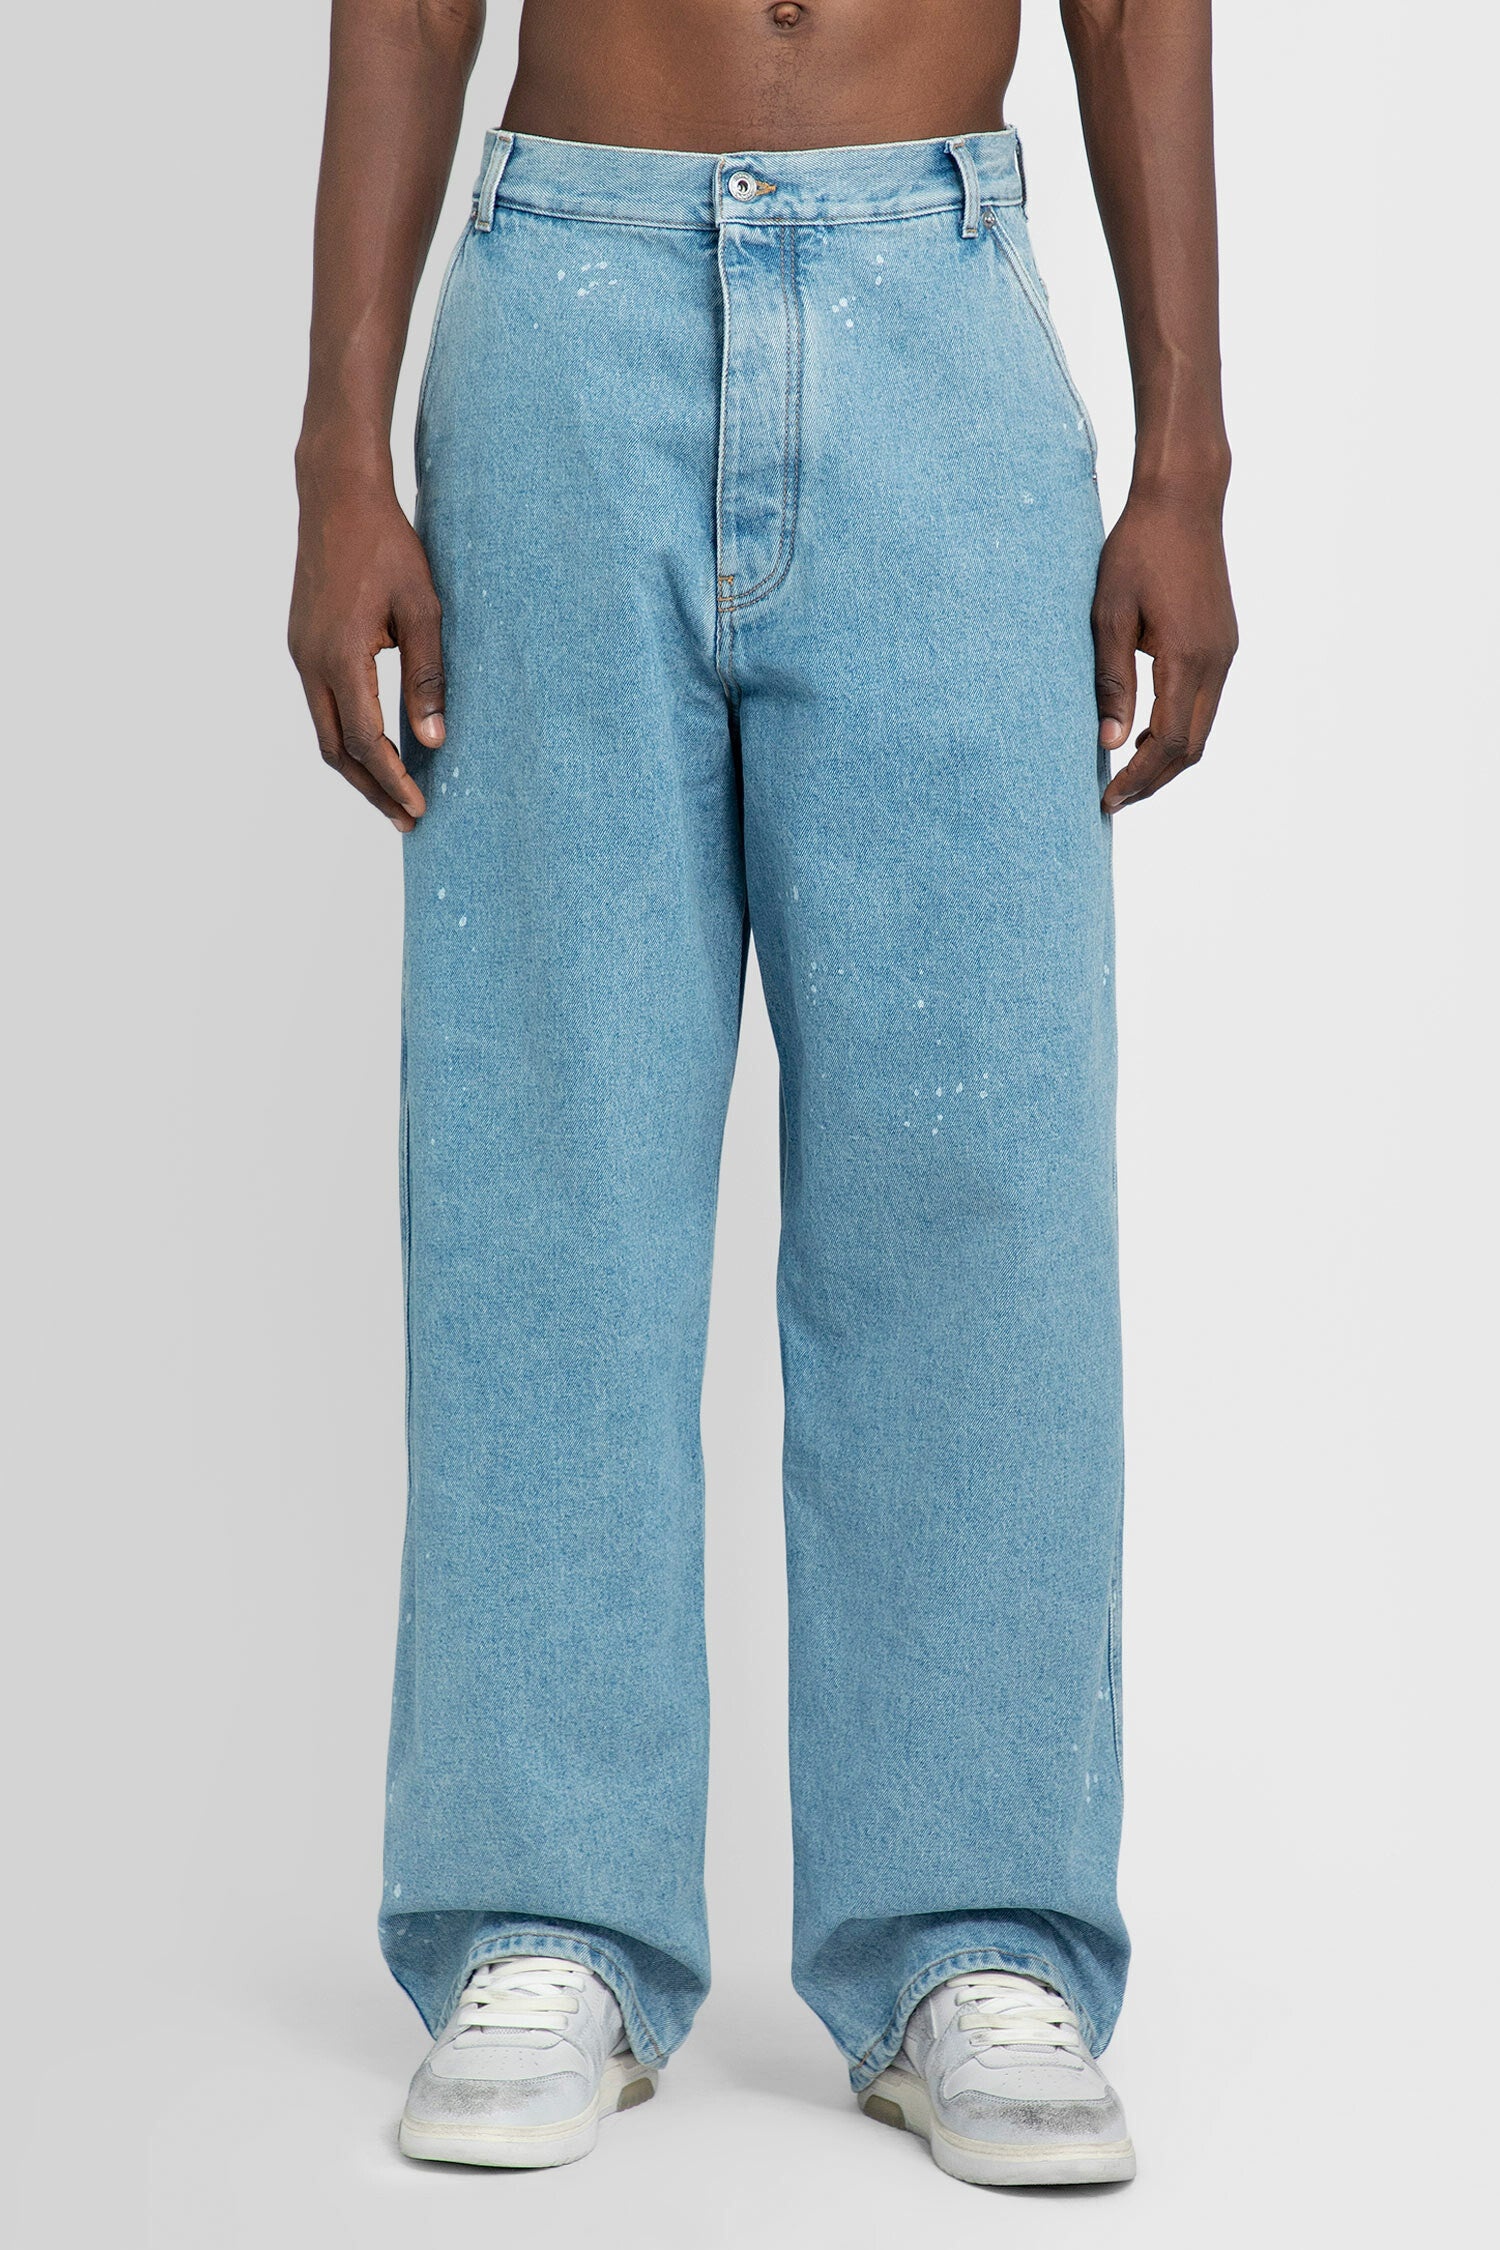 OFF-WHITE MAN BLUE JEANS - 2